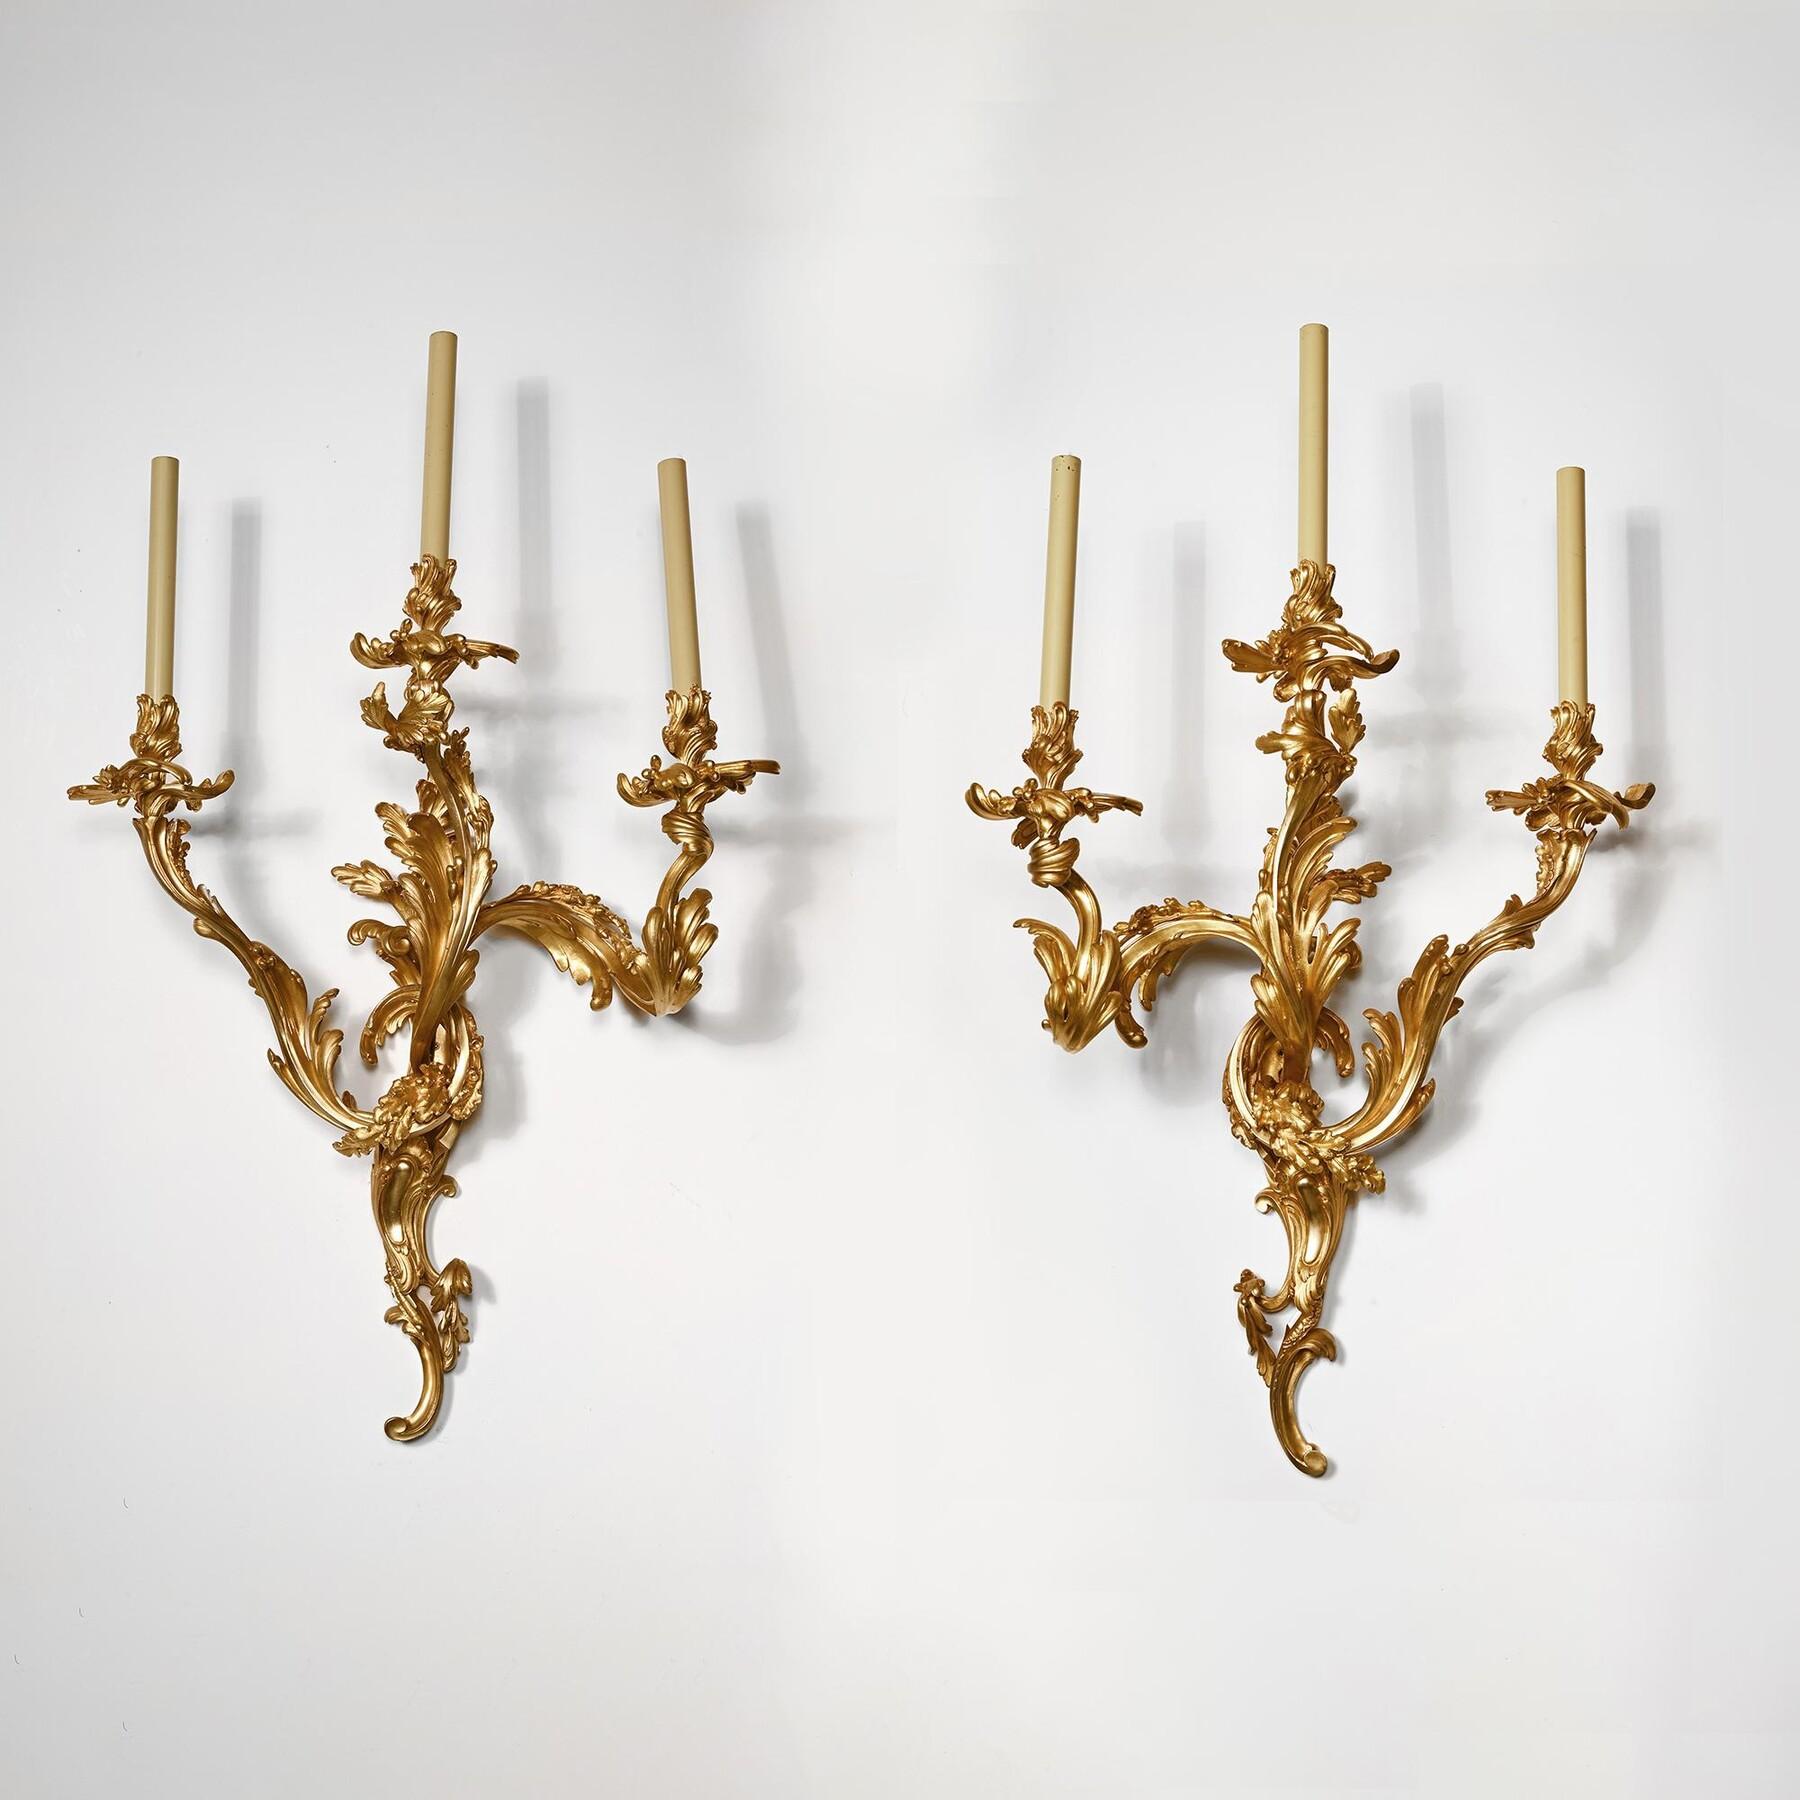 Pair of Large 19th Century French Three Branch Ormolu Wall Lights or Appliqués For Sale 1